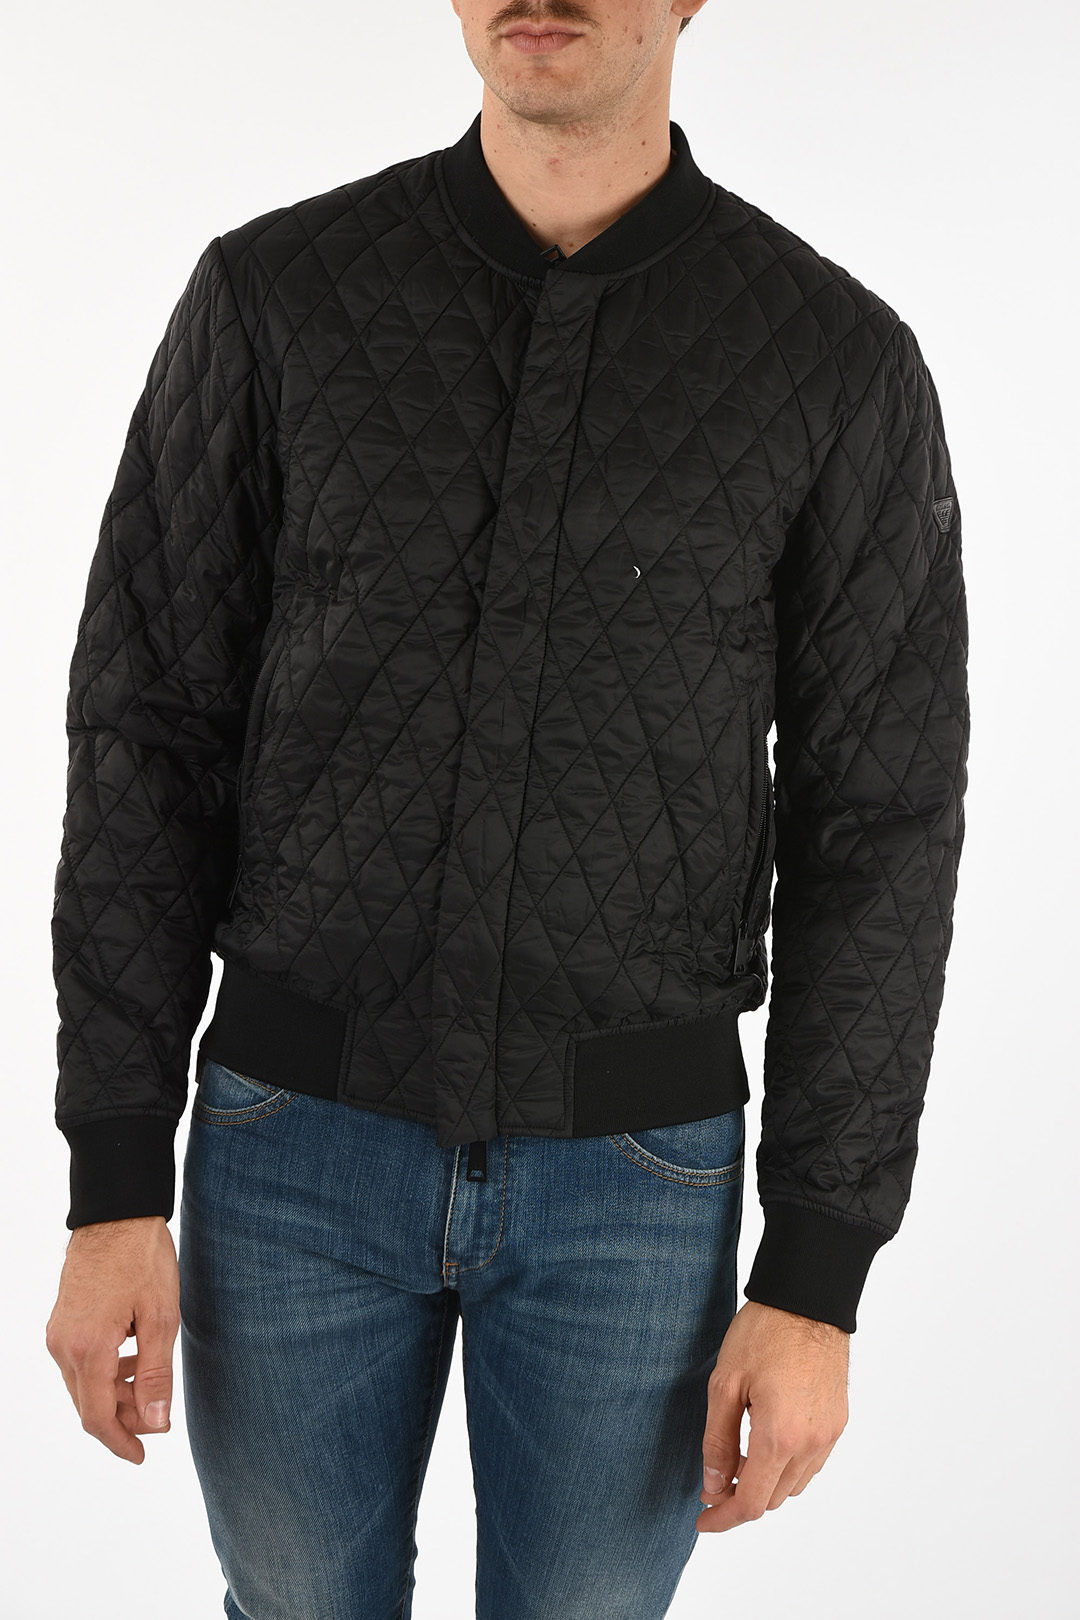 Armani JEANS Quilted Bomber - Glamood